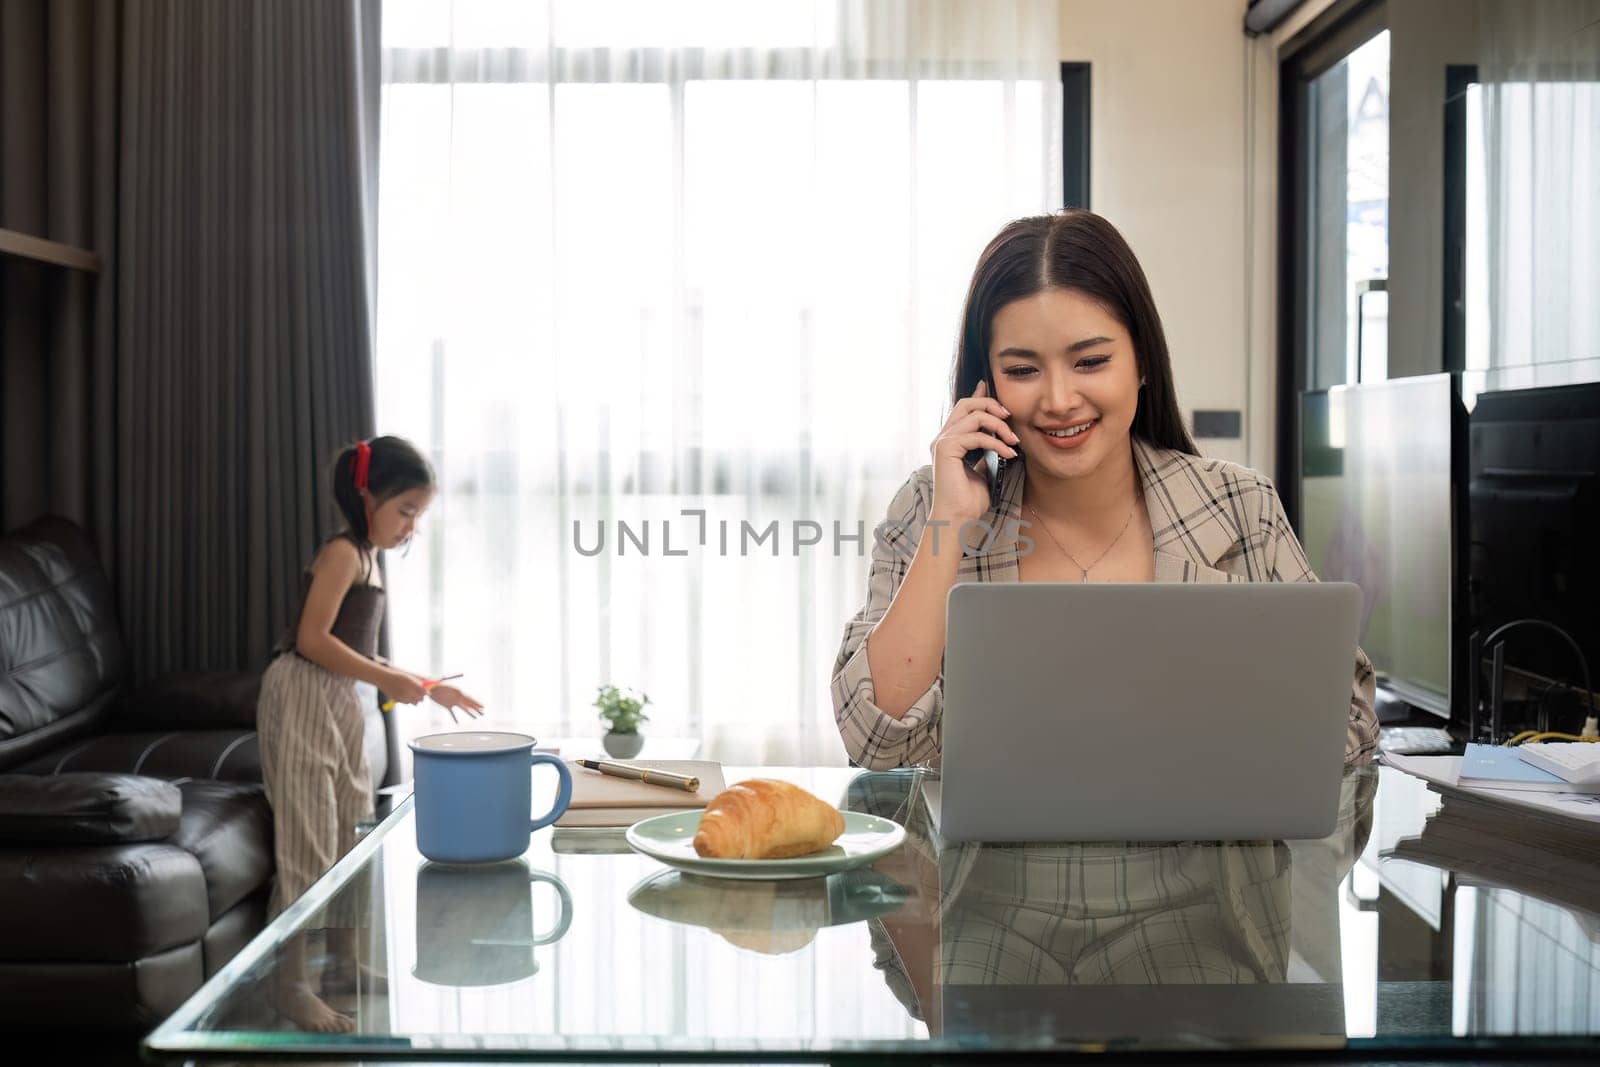 The young woman works from home, raises her daughter, and discusses work with co-workers on the phone and online..